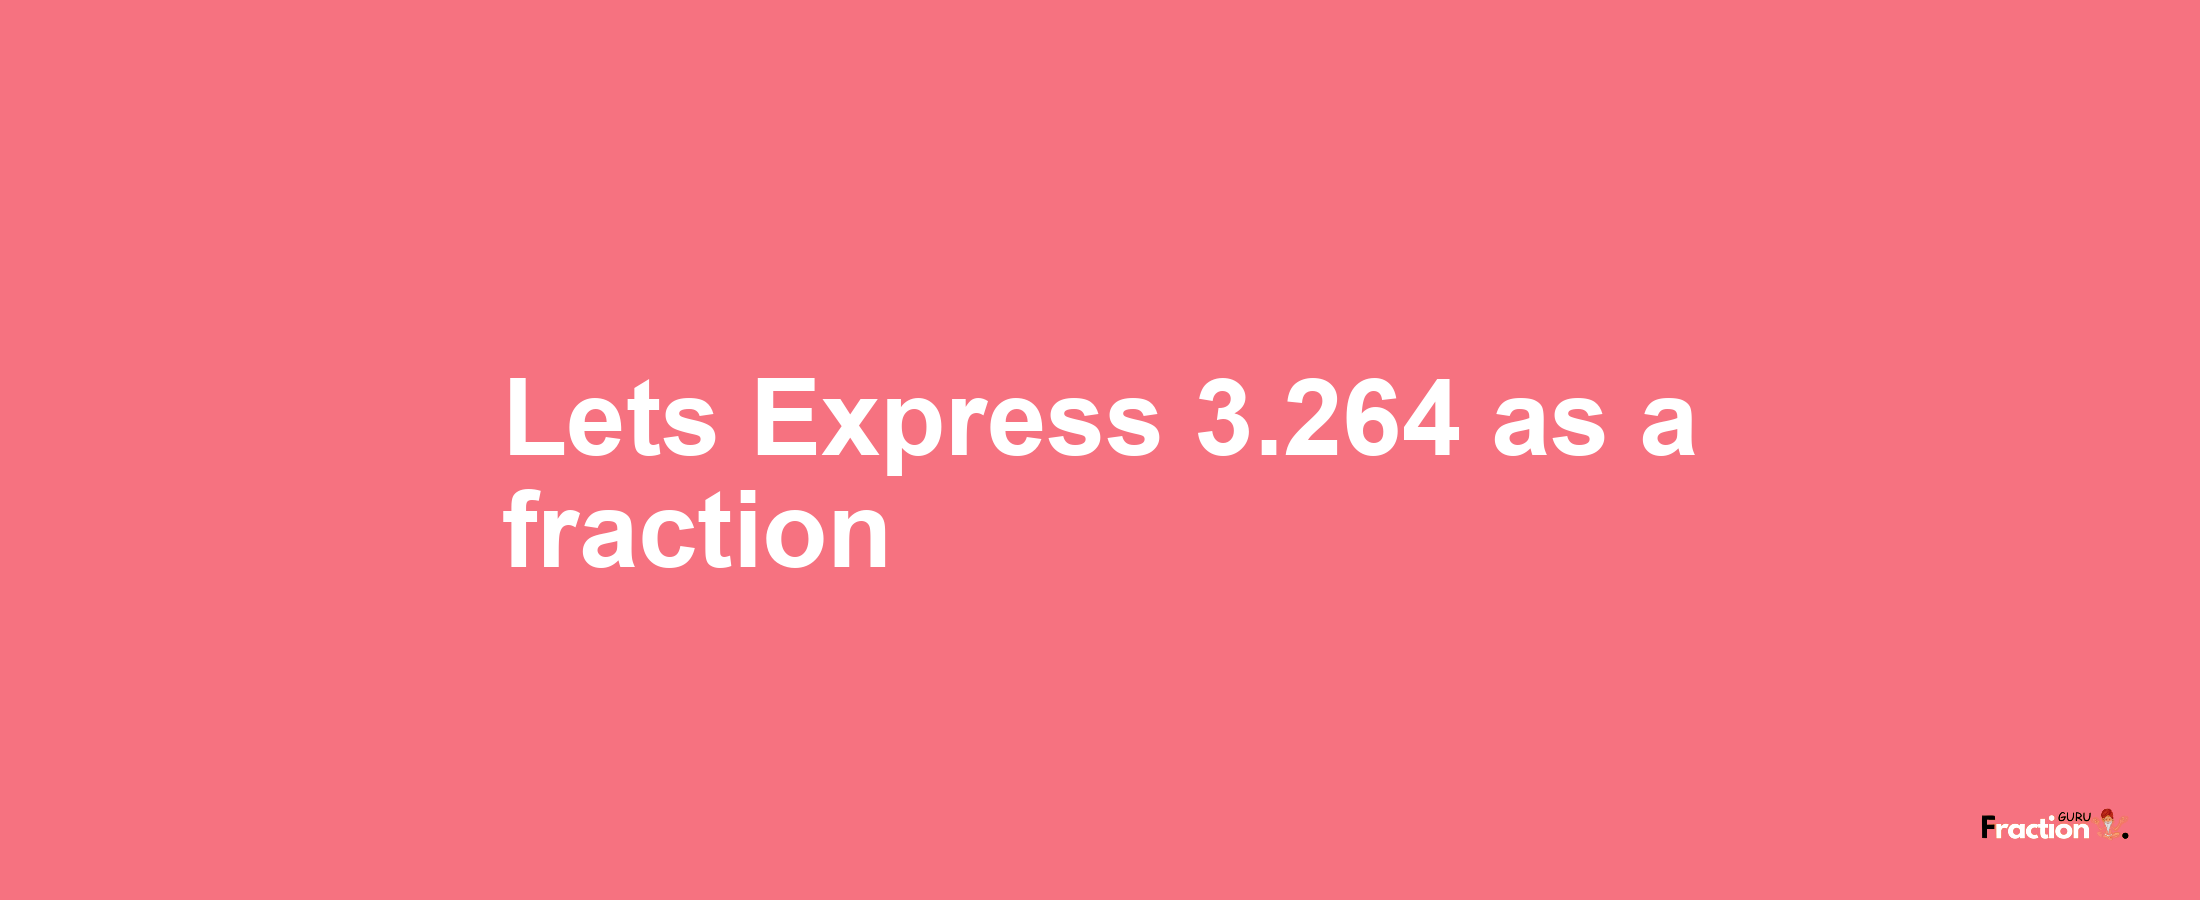 Lets Express 3.264 as afraction